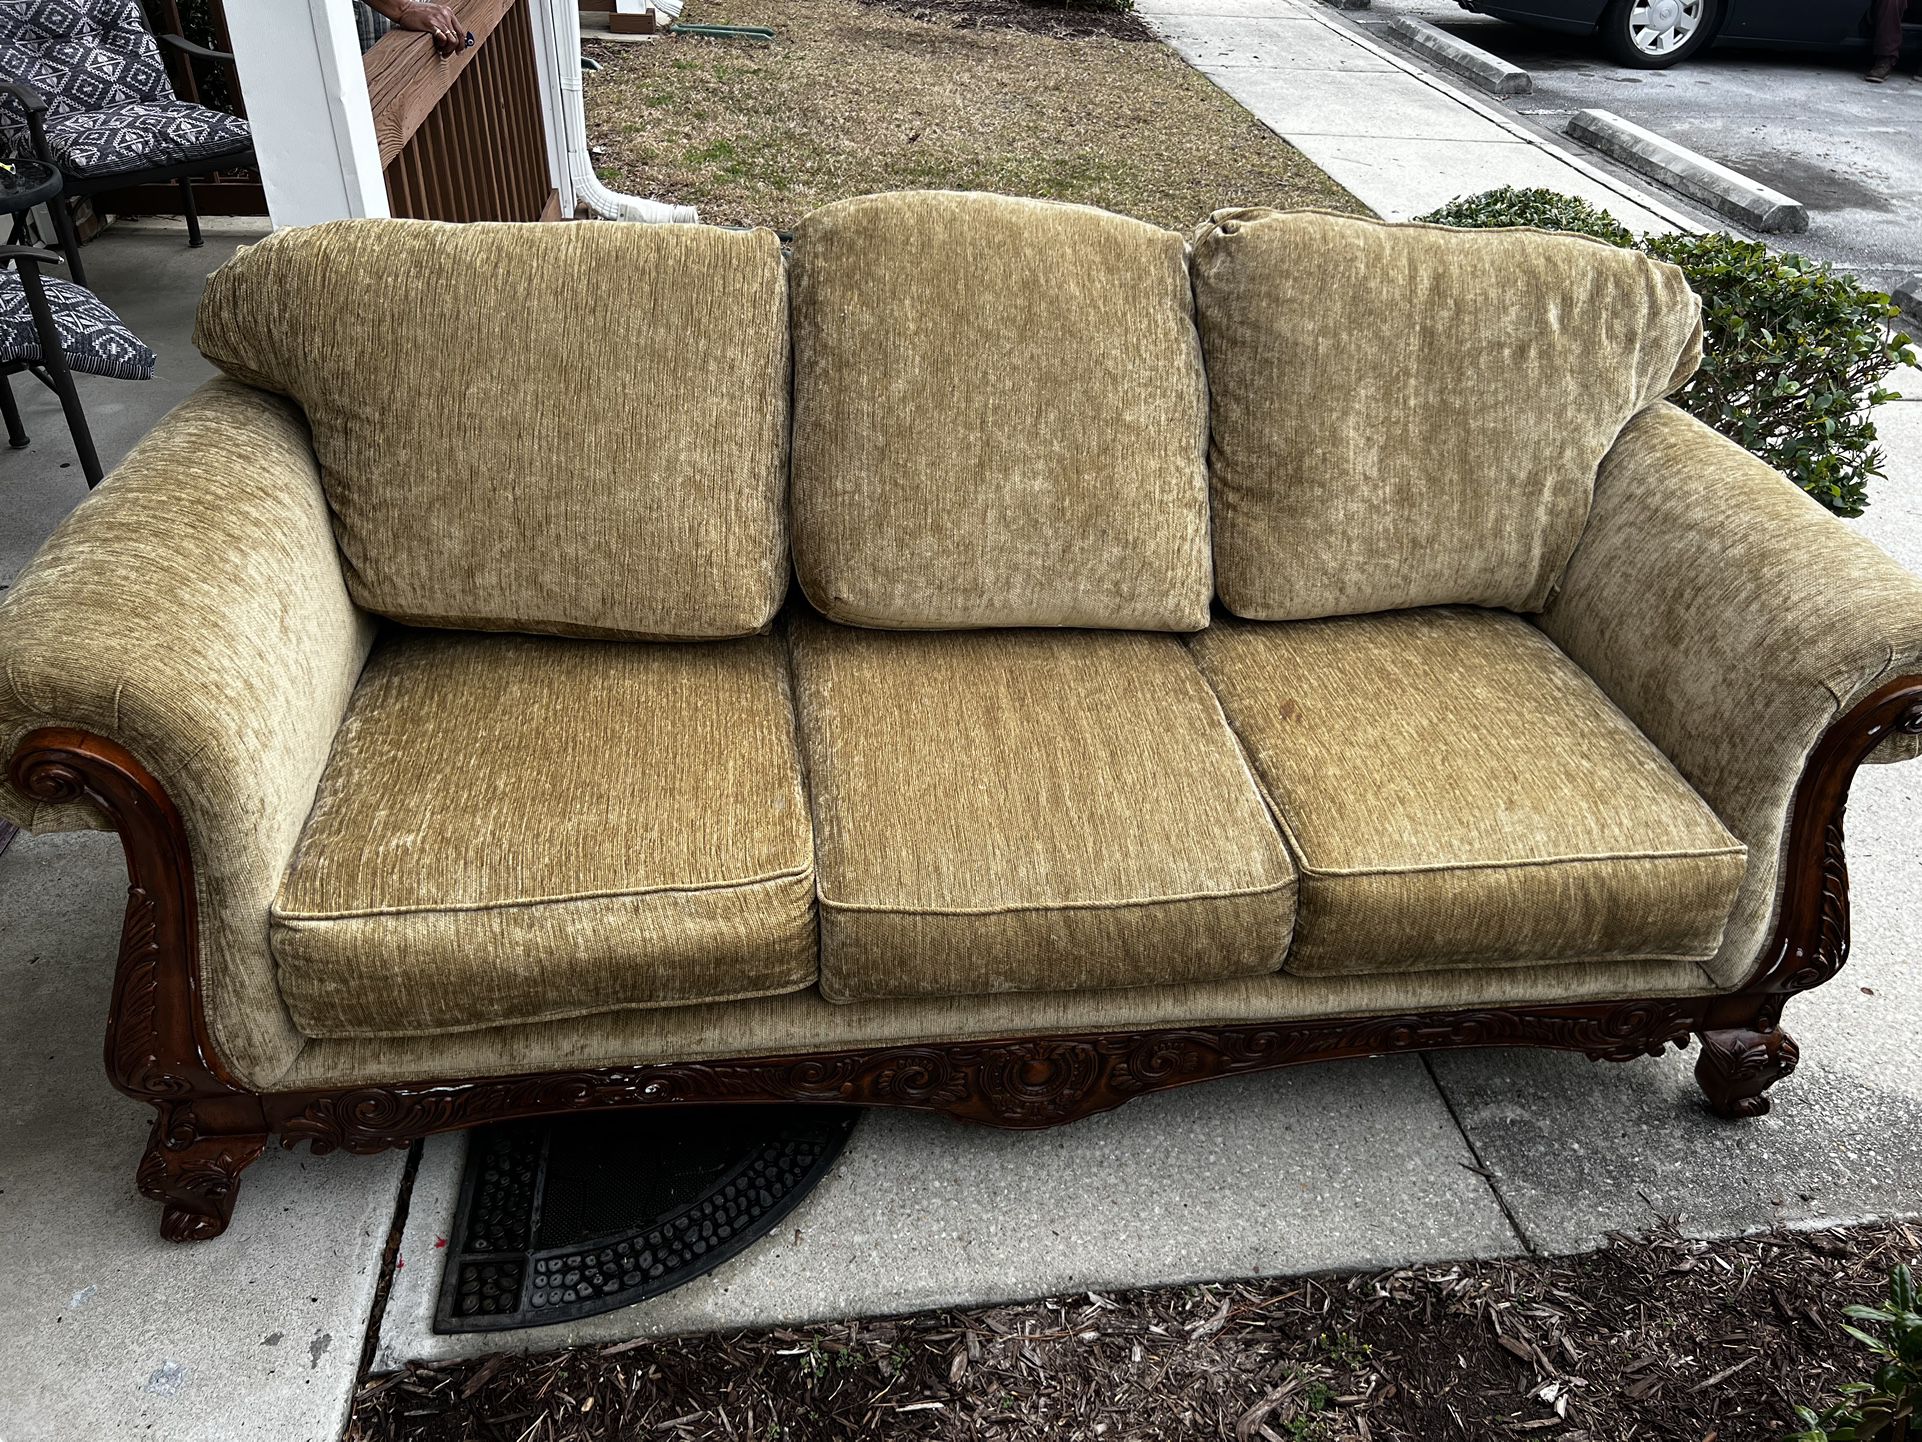 Broyhill Couch 